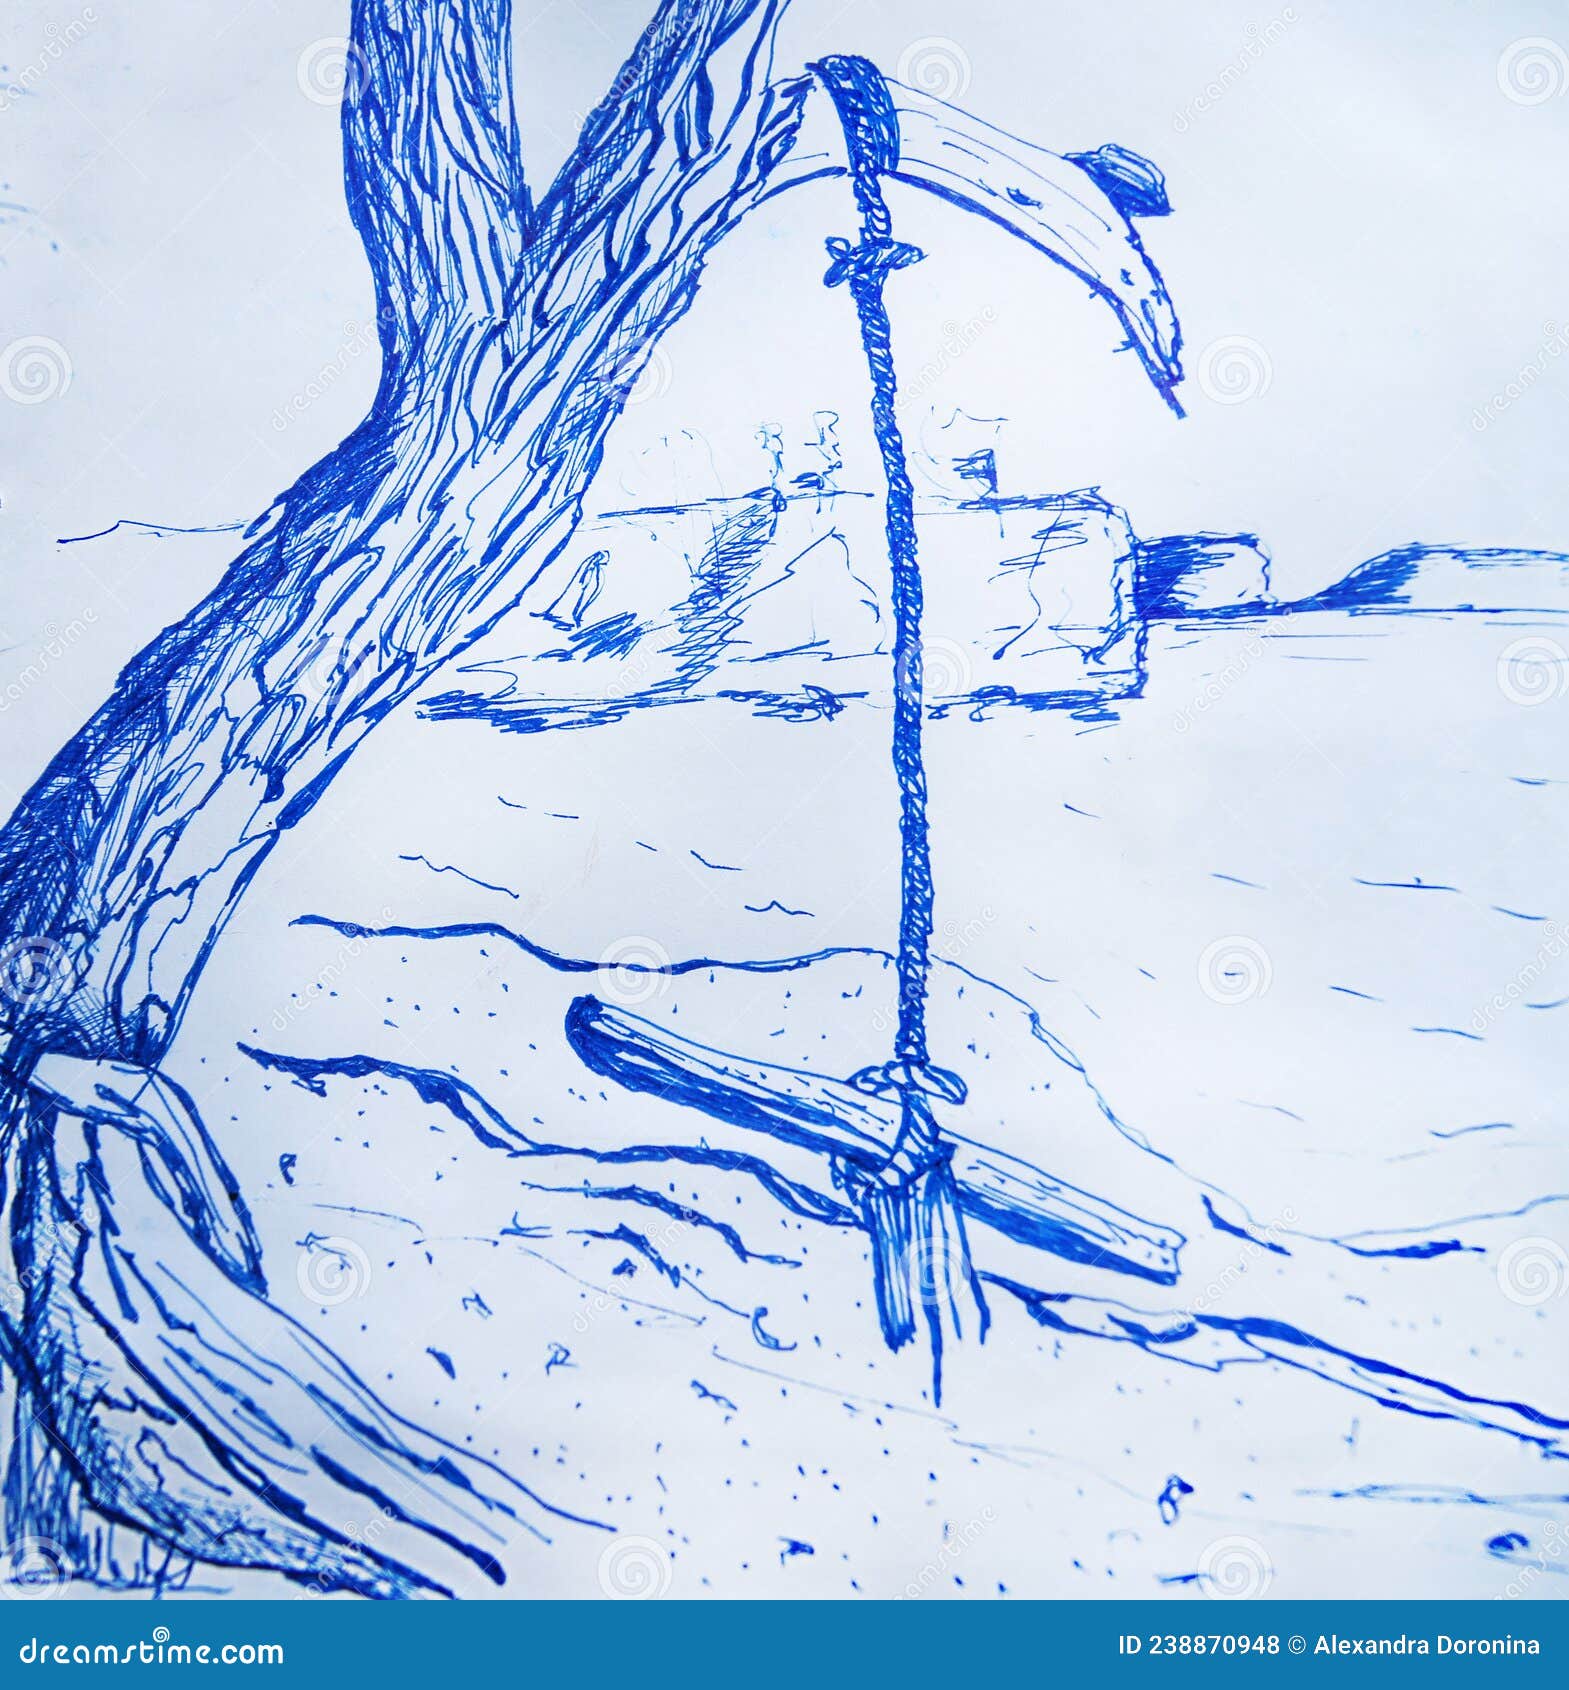 Rope Swing on a Tree by the Sea Stock Illustration - Illustration of blue,  asia: 238870948